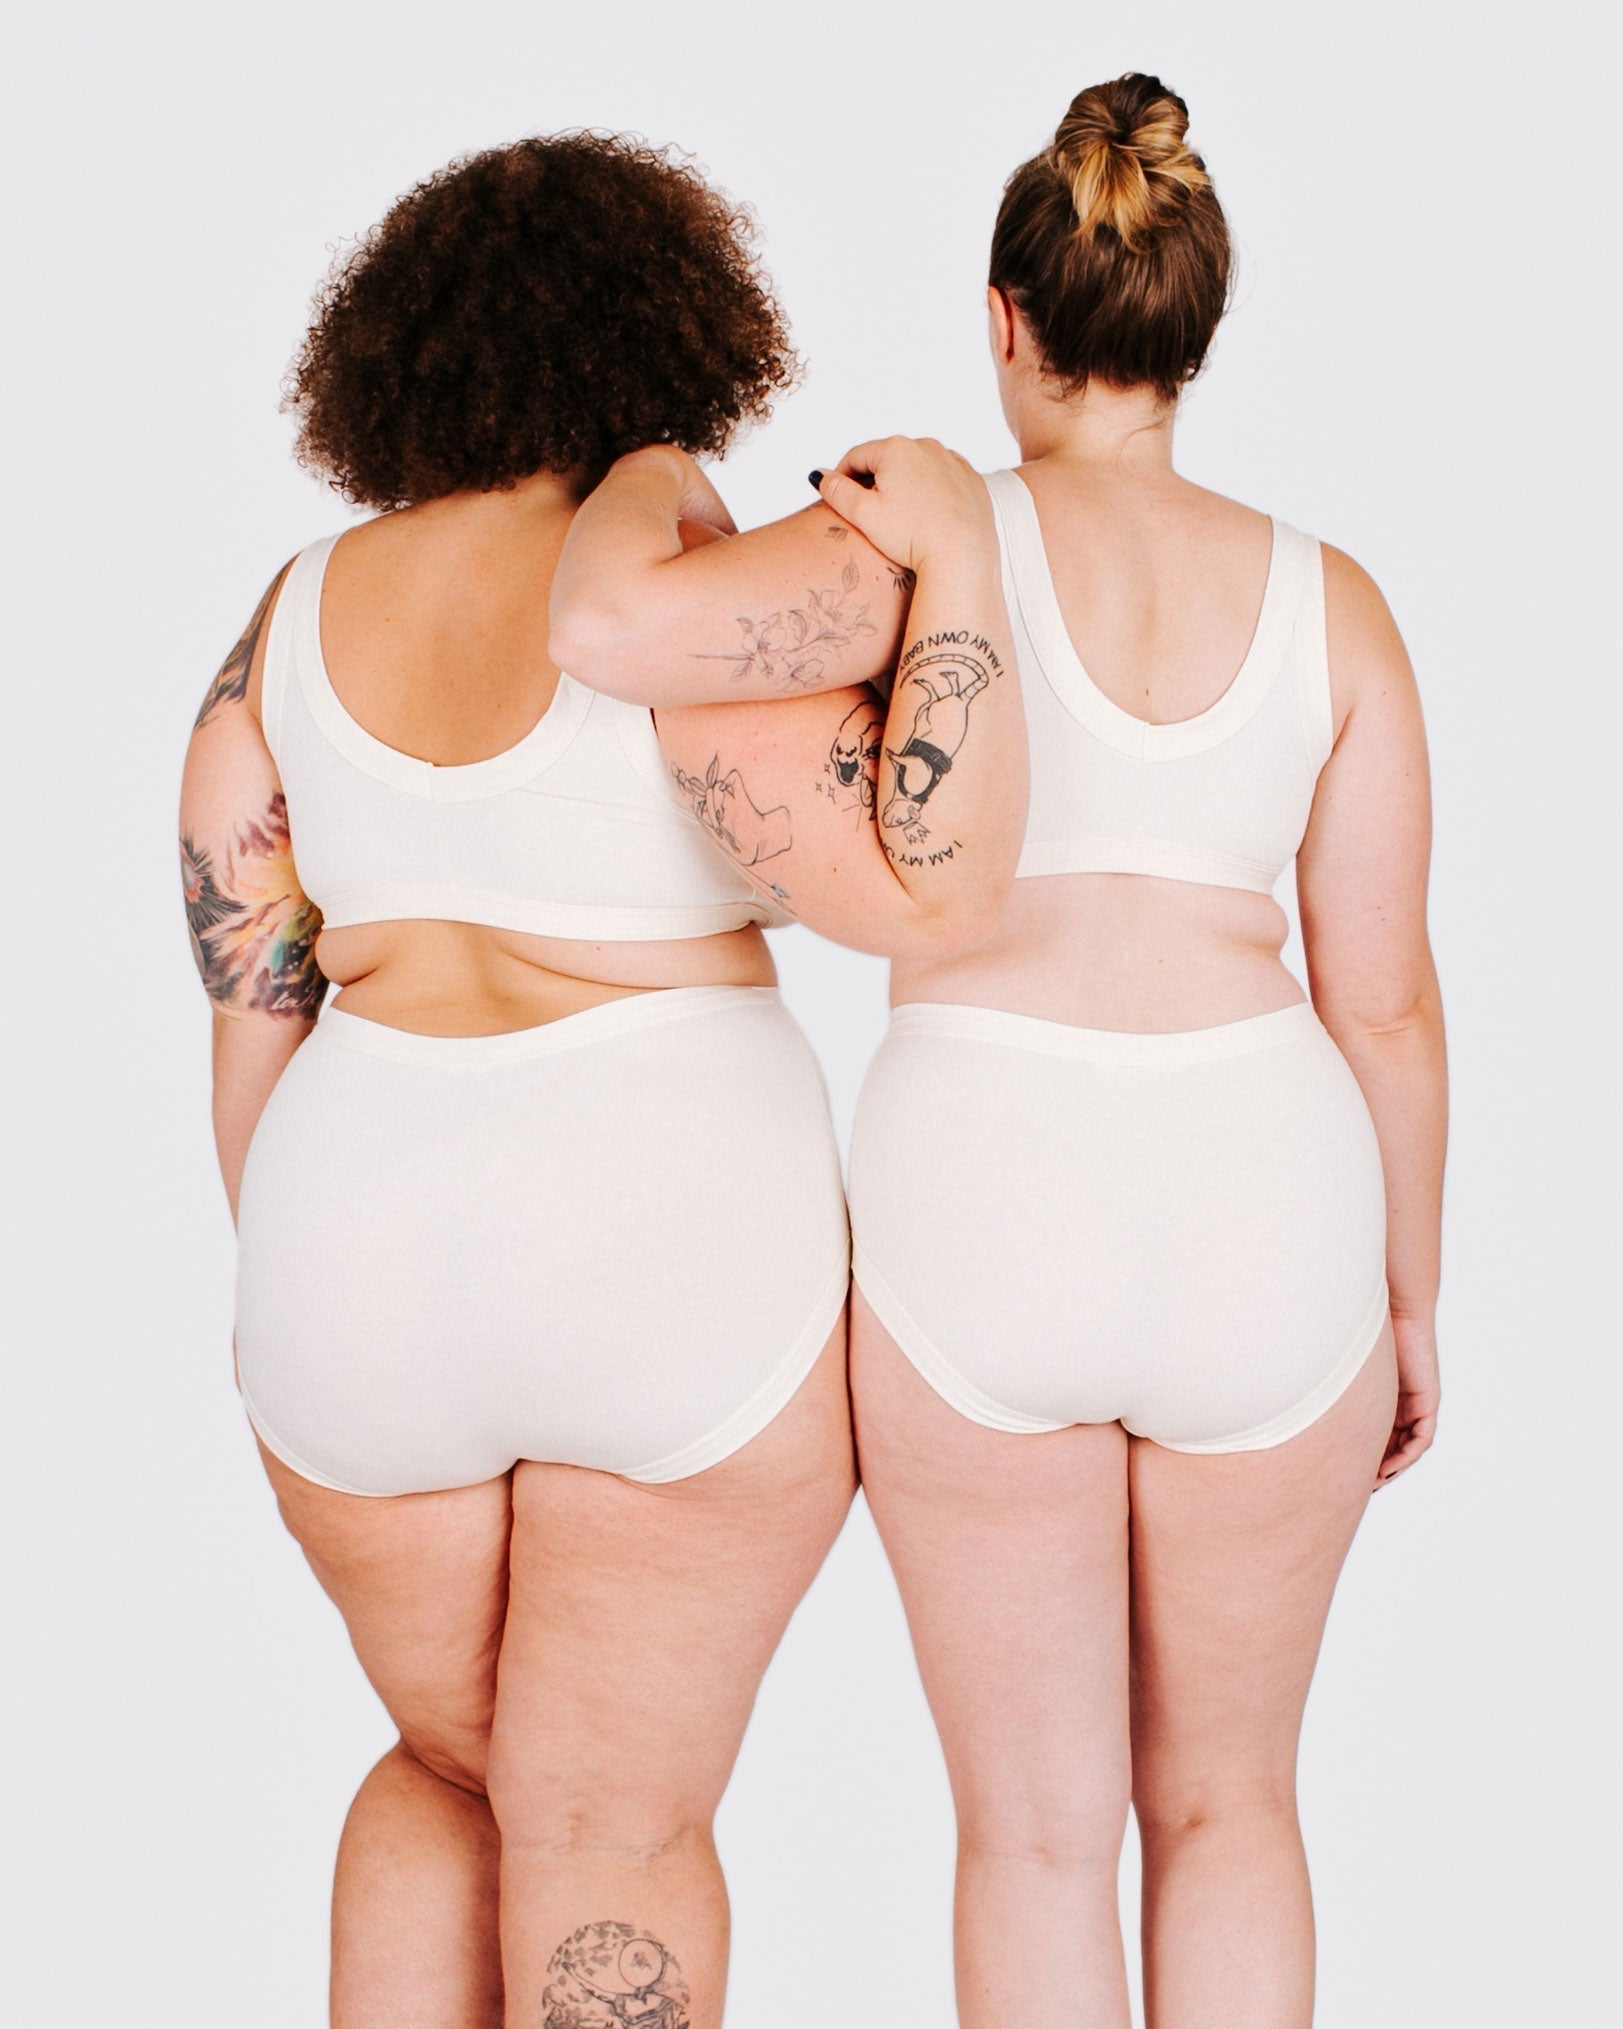 Fit photo from the back of Thunderpants organic cotton Original style underwear and Bralette in off-white on two model standing together.